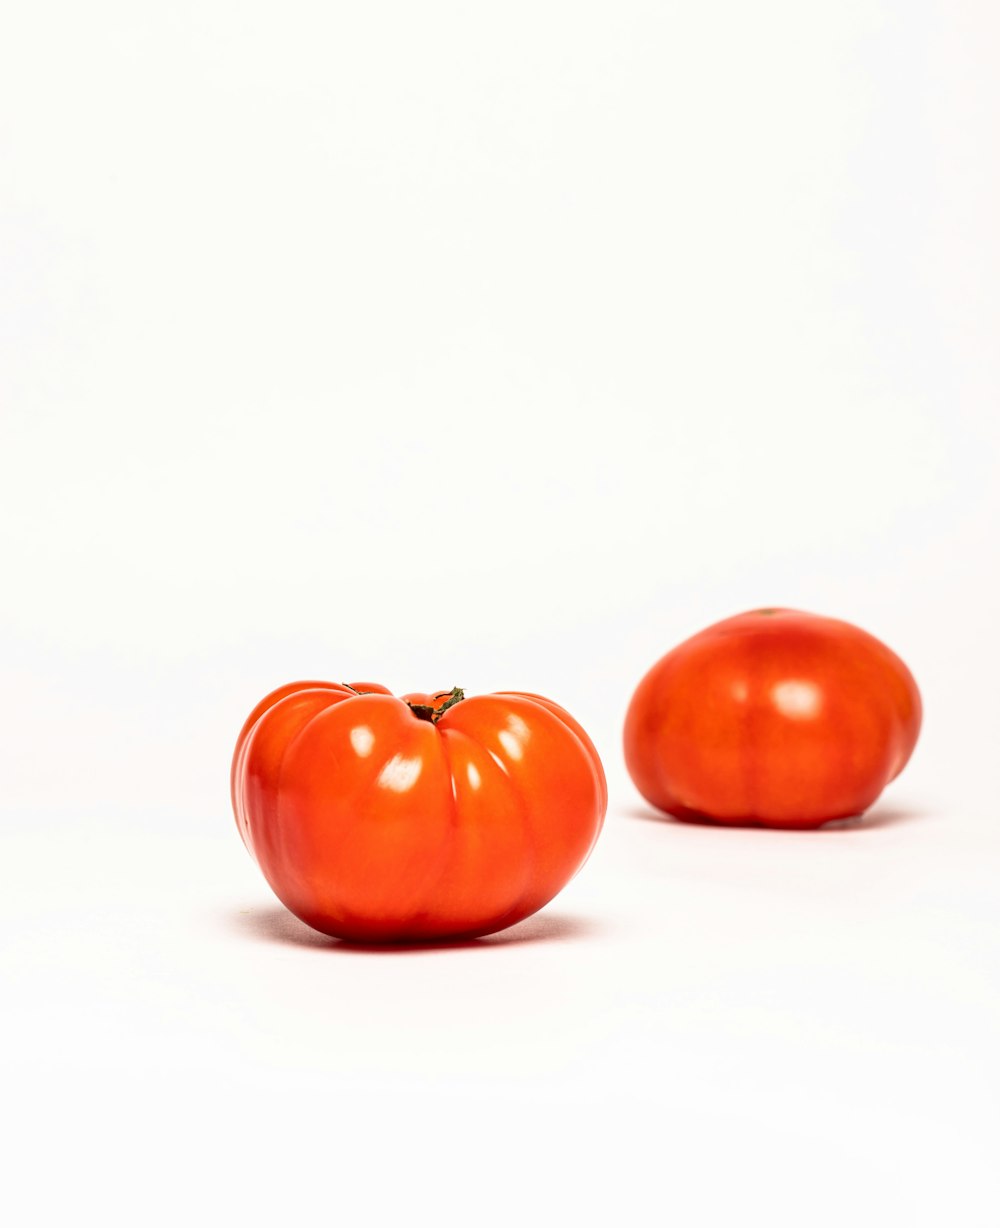 a couple of tomatoes sitting next to each other